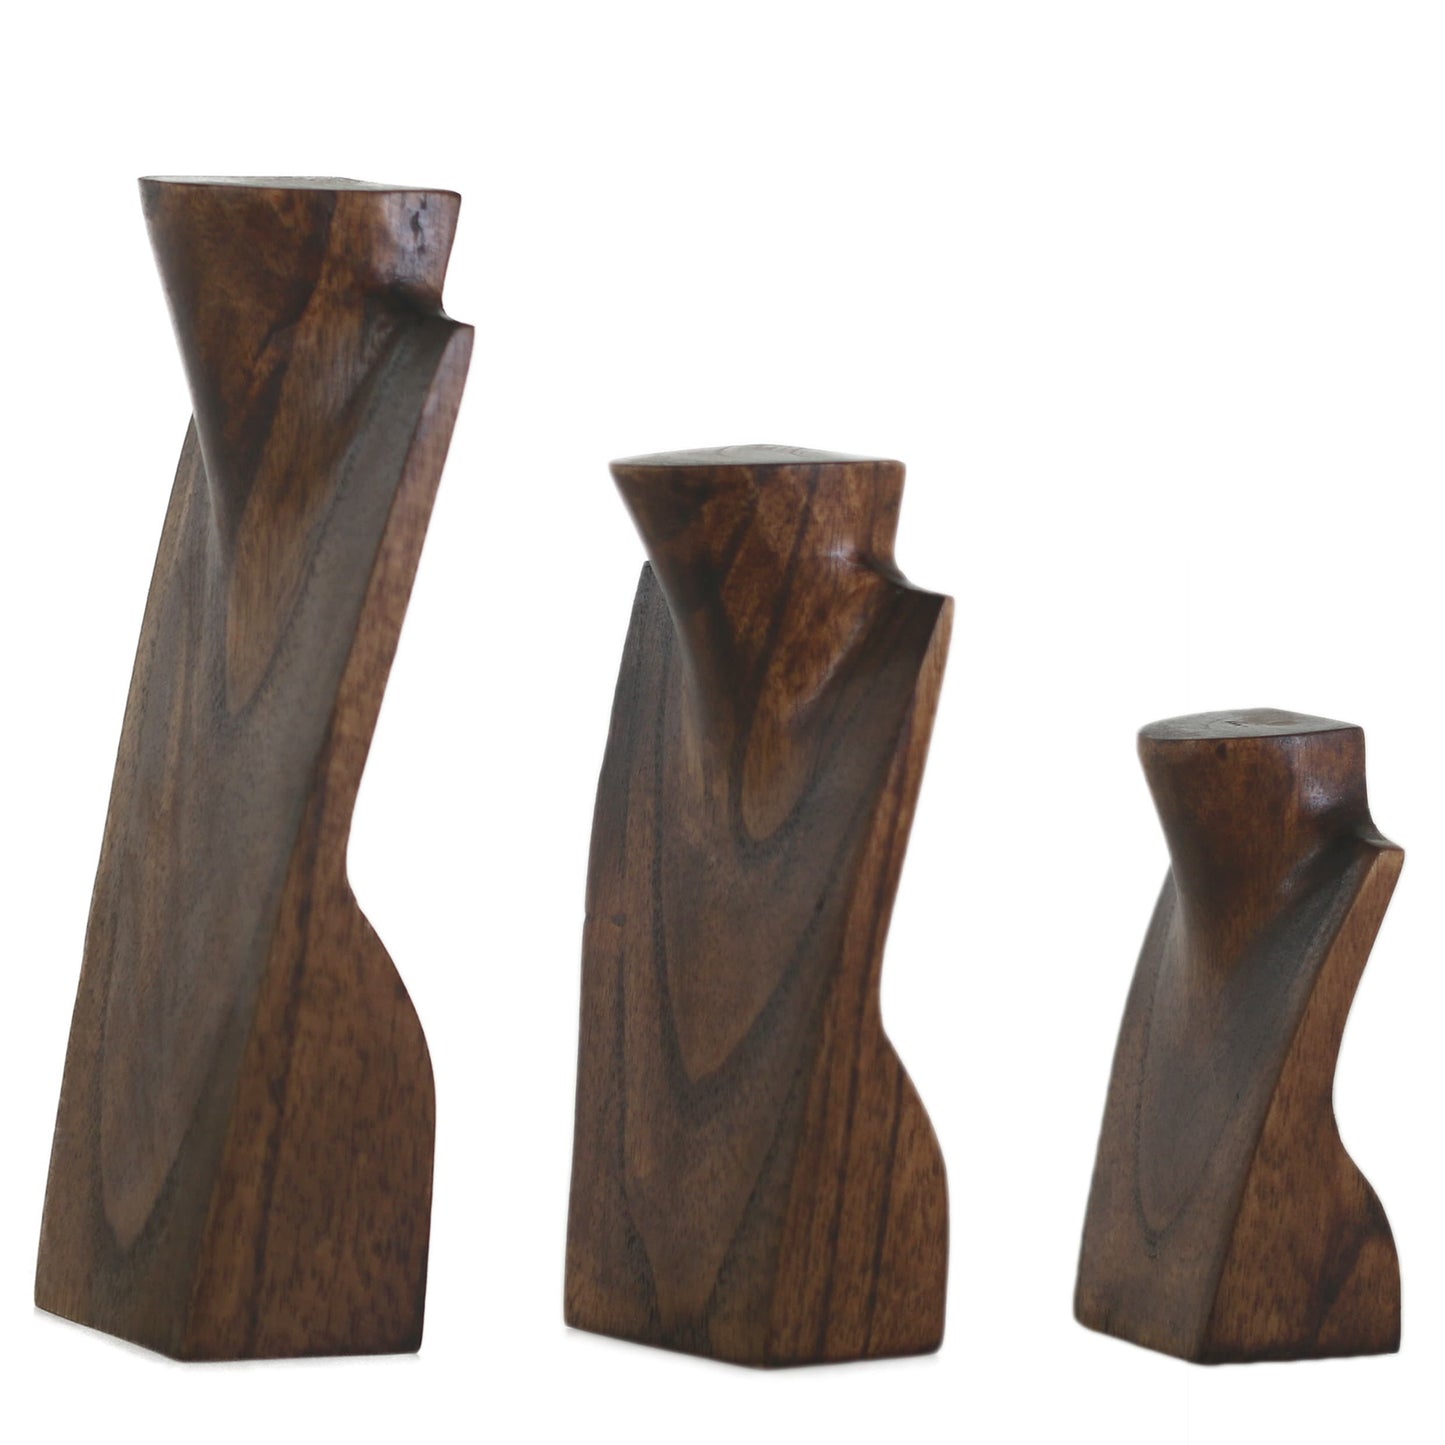 a group of three wooden vases sitting next to each other